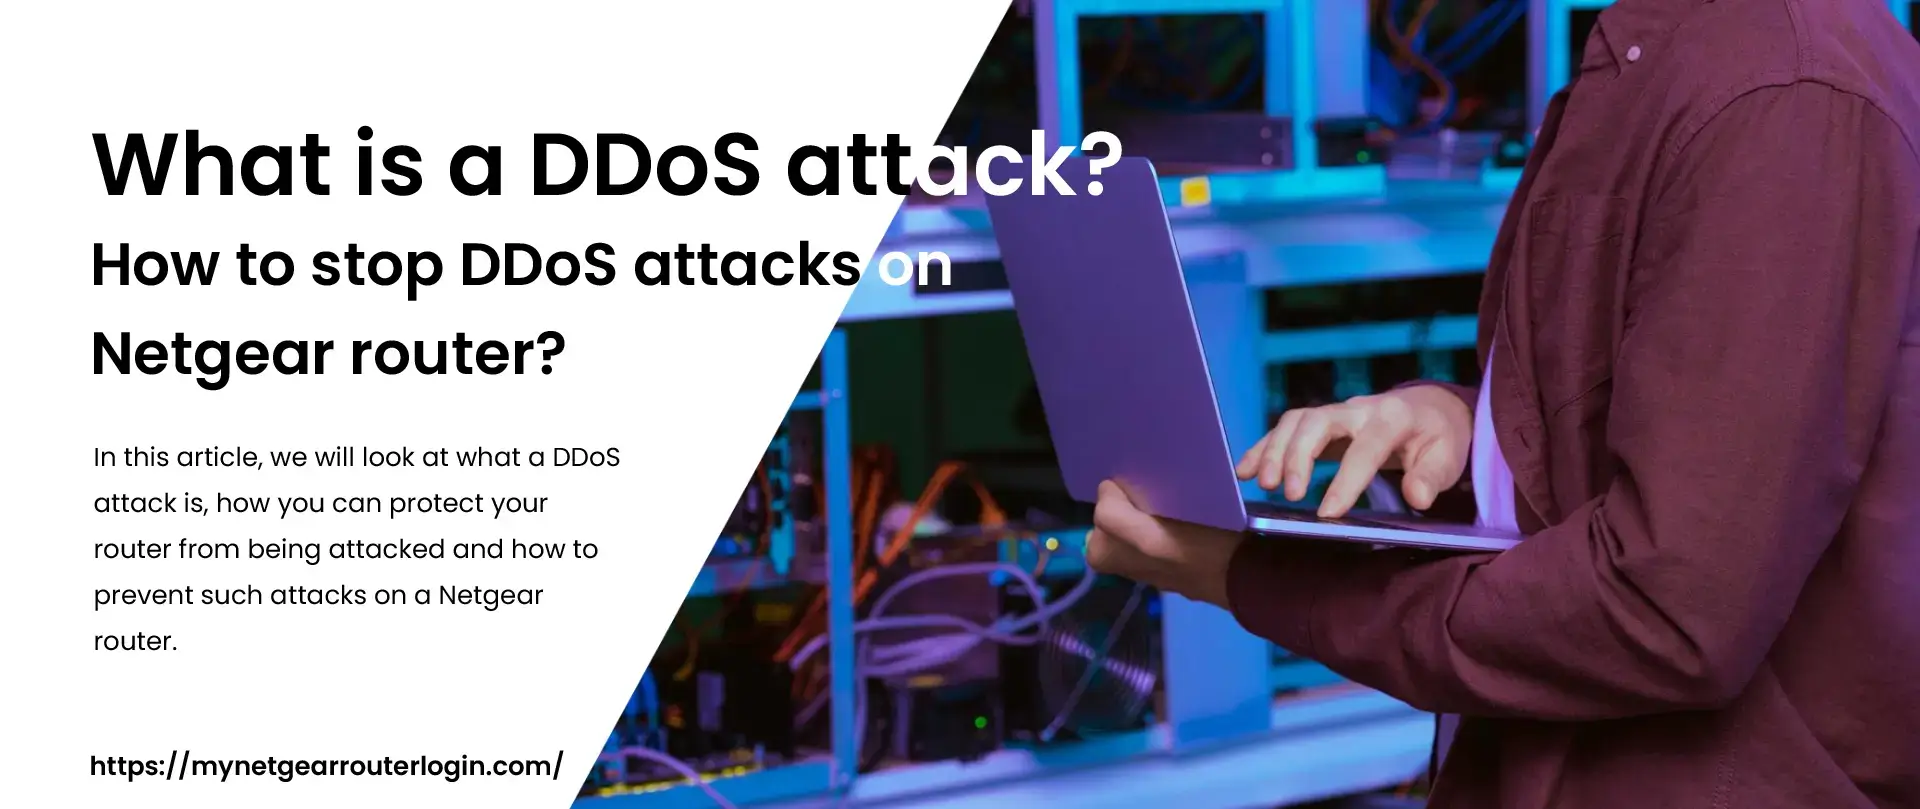 What is a DDoS attack